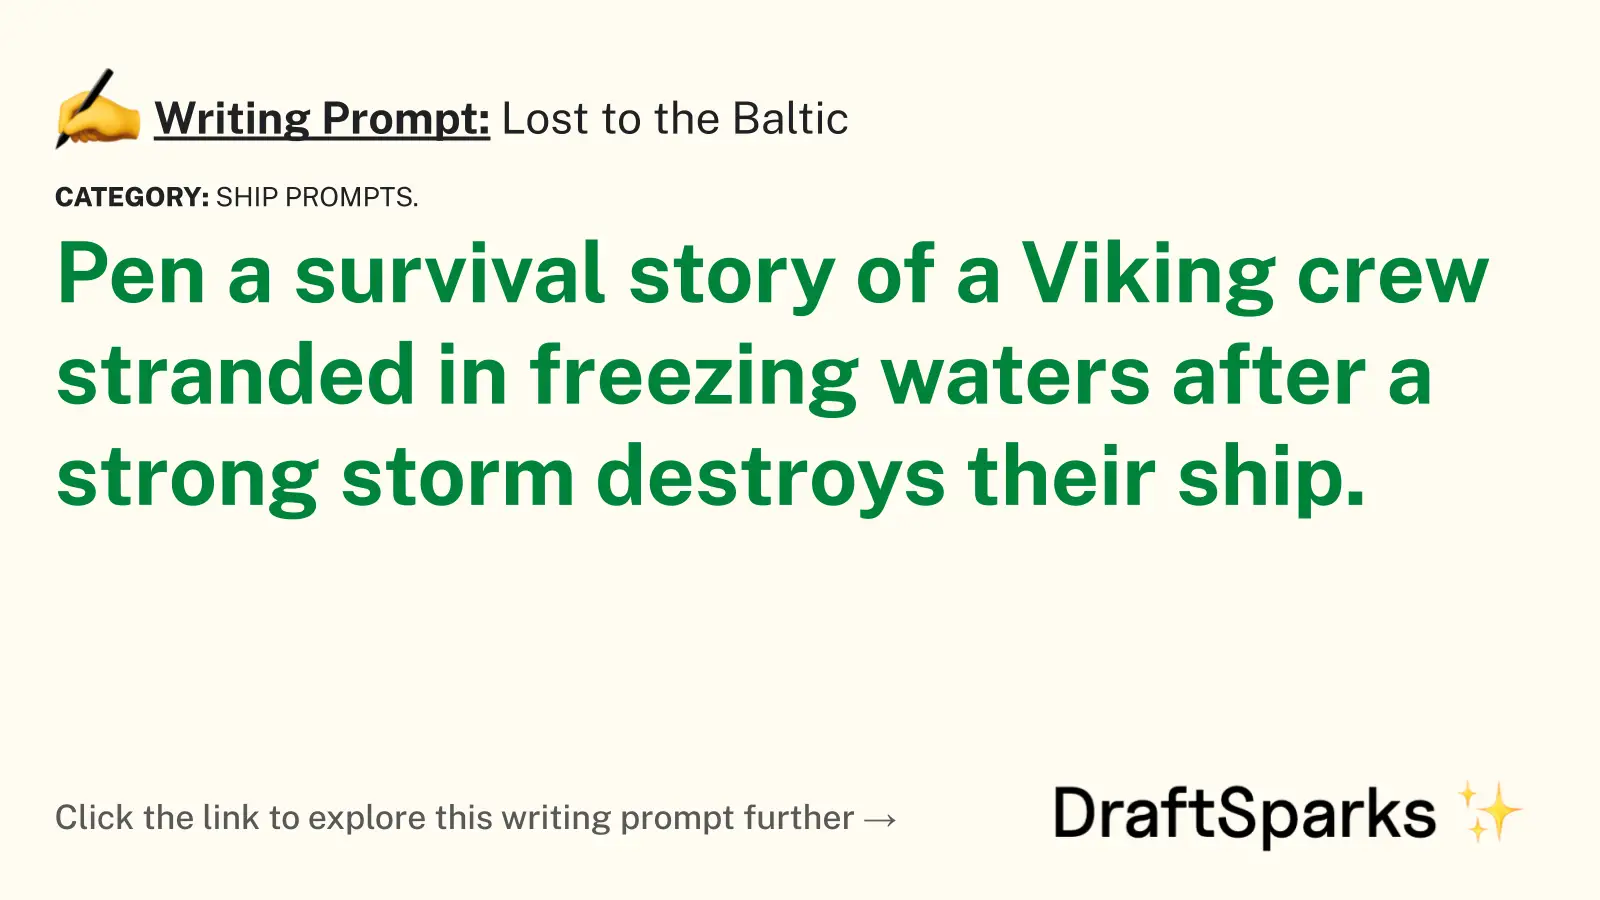 Lost to the Baltic